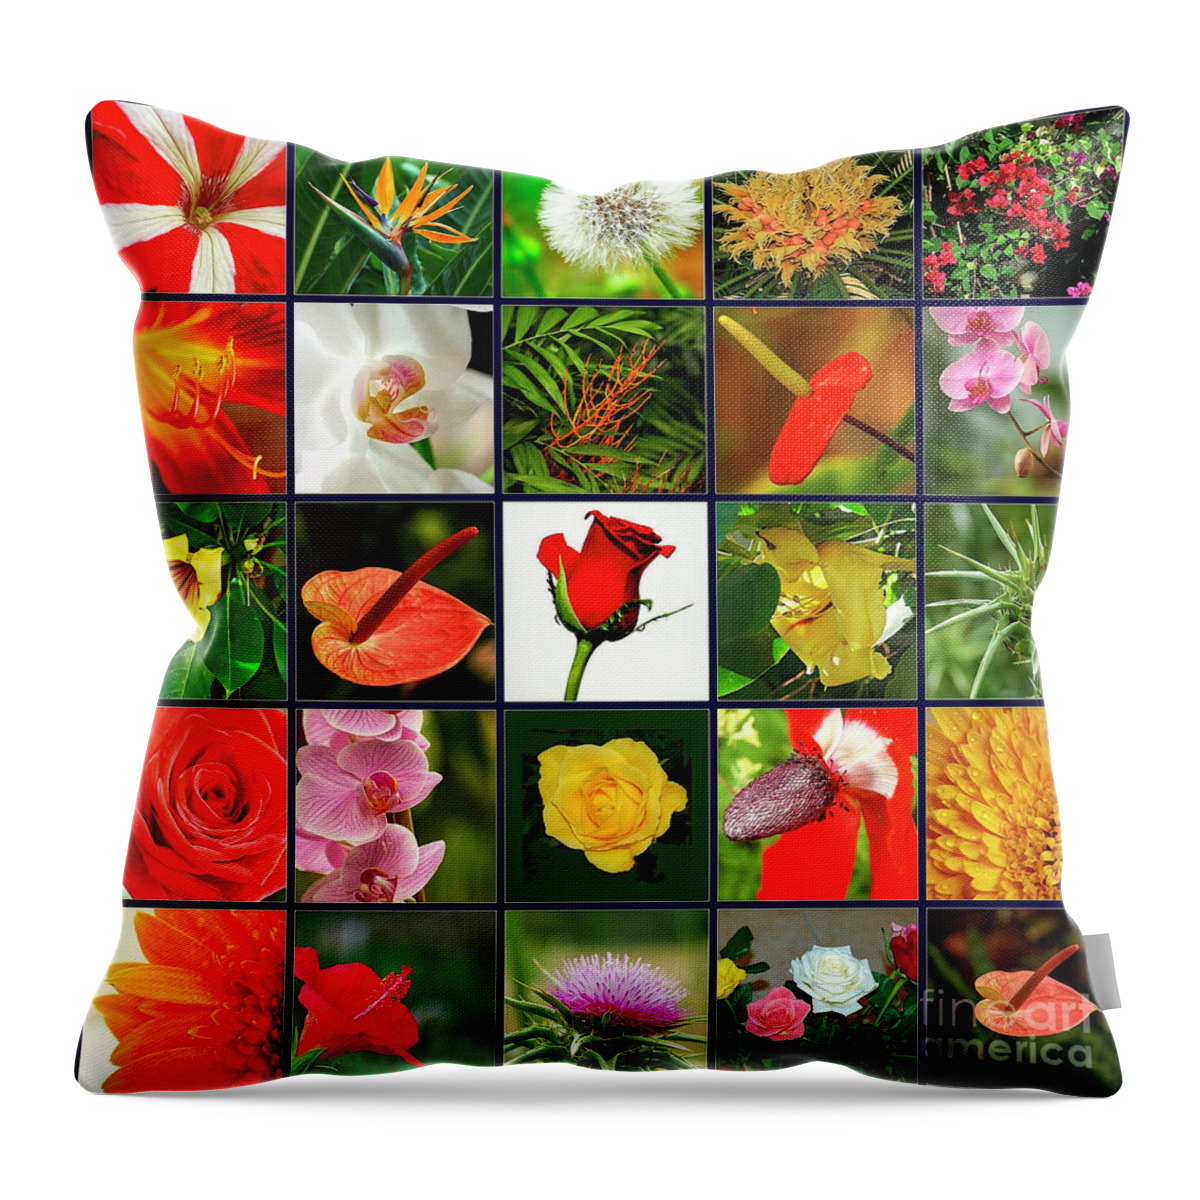 Collage Throw Pillow featuring the photograph 25 Image Collage Of Flowers by Tomi Junger